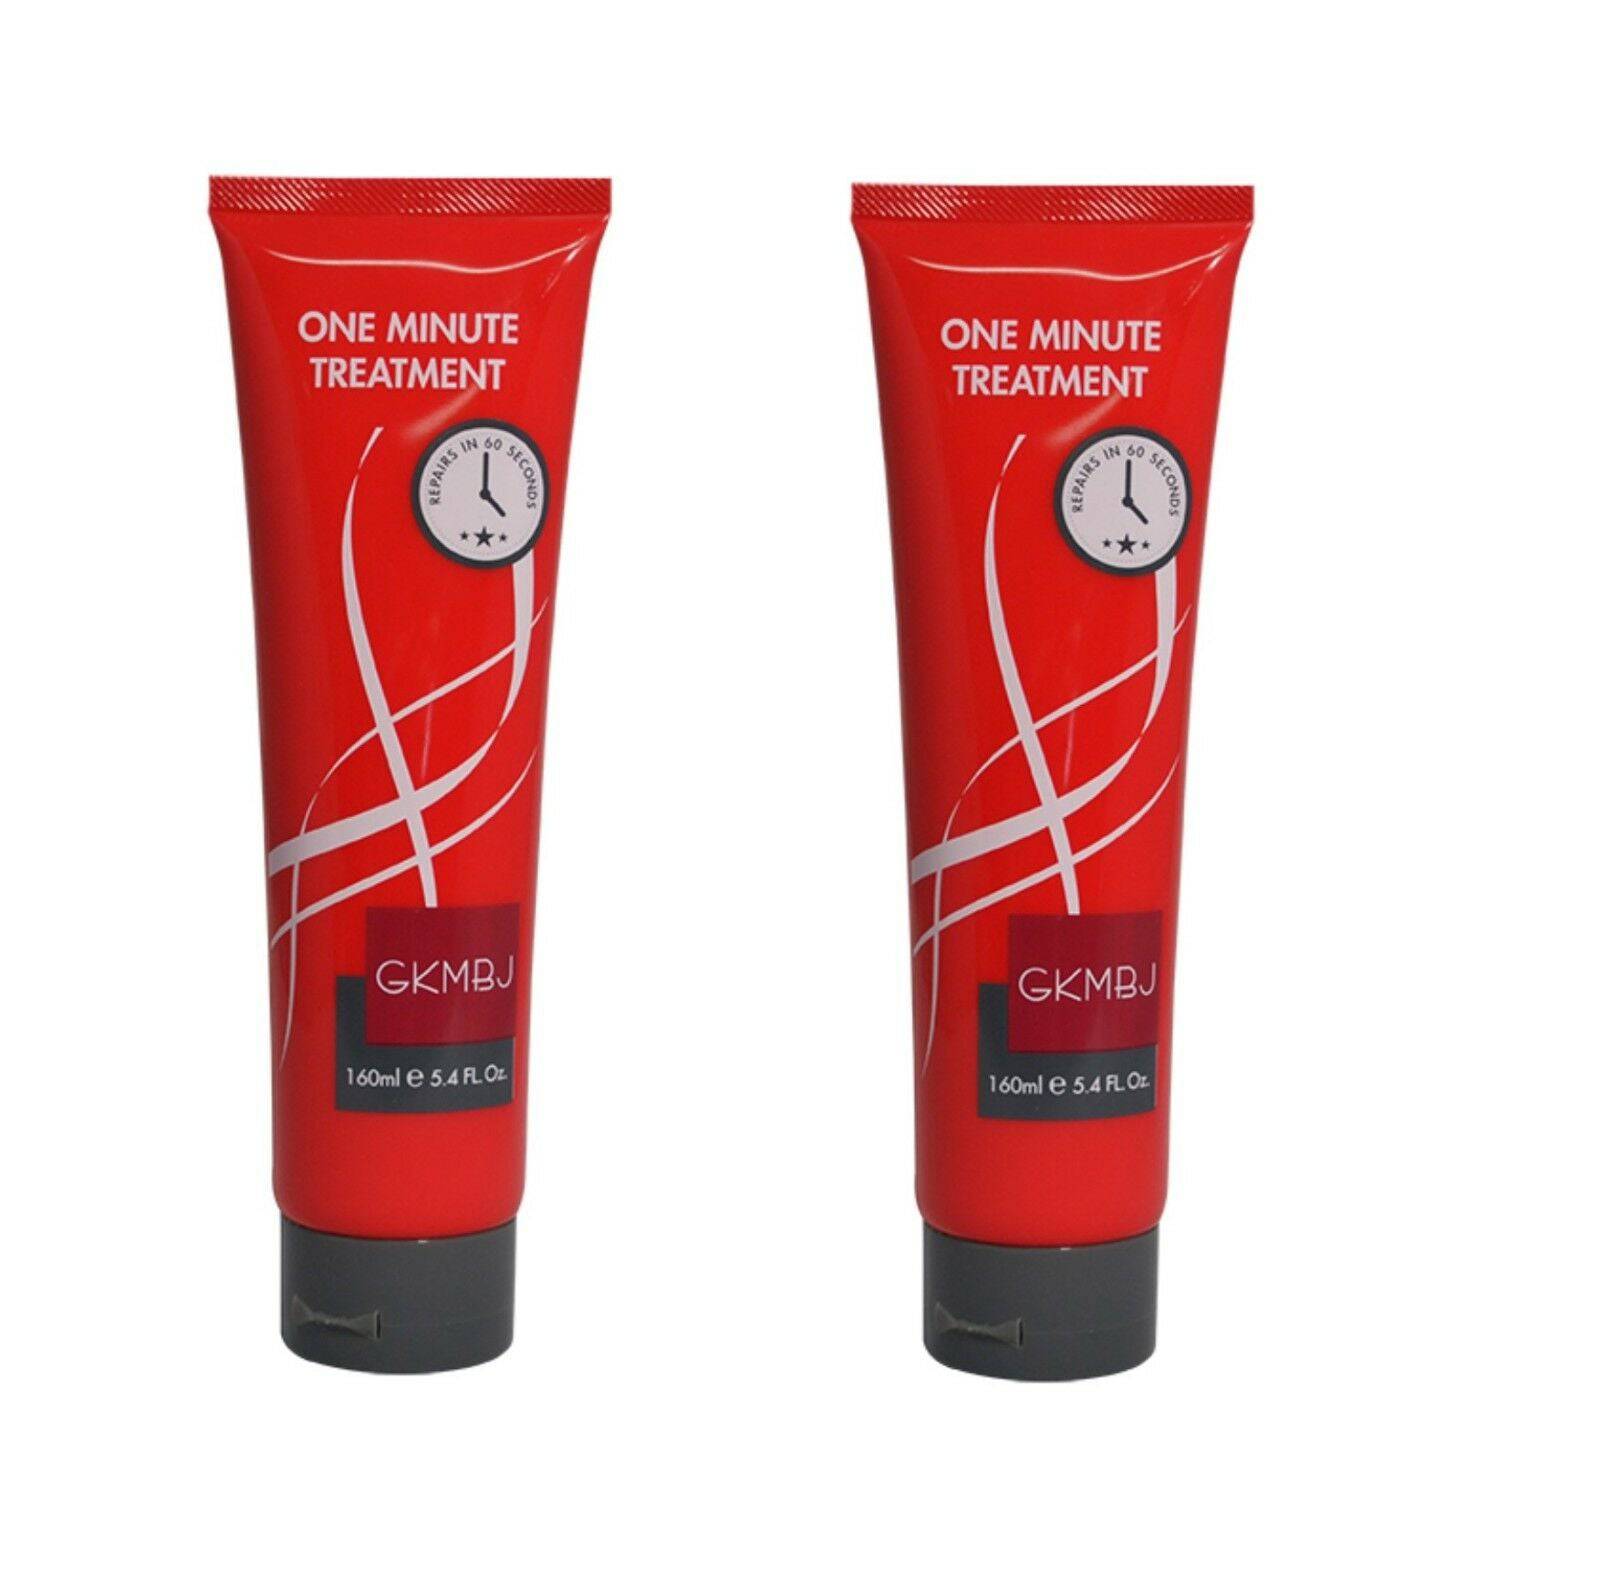 GKMBJ One Minute Treatment 160ml x 2 Repairs Damaged Hair Deeply Penetrating GKMBJ - On Line Hair Depot